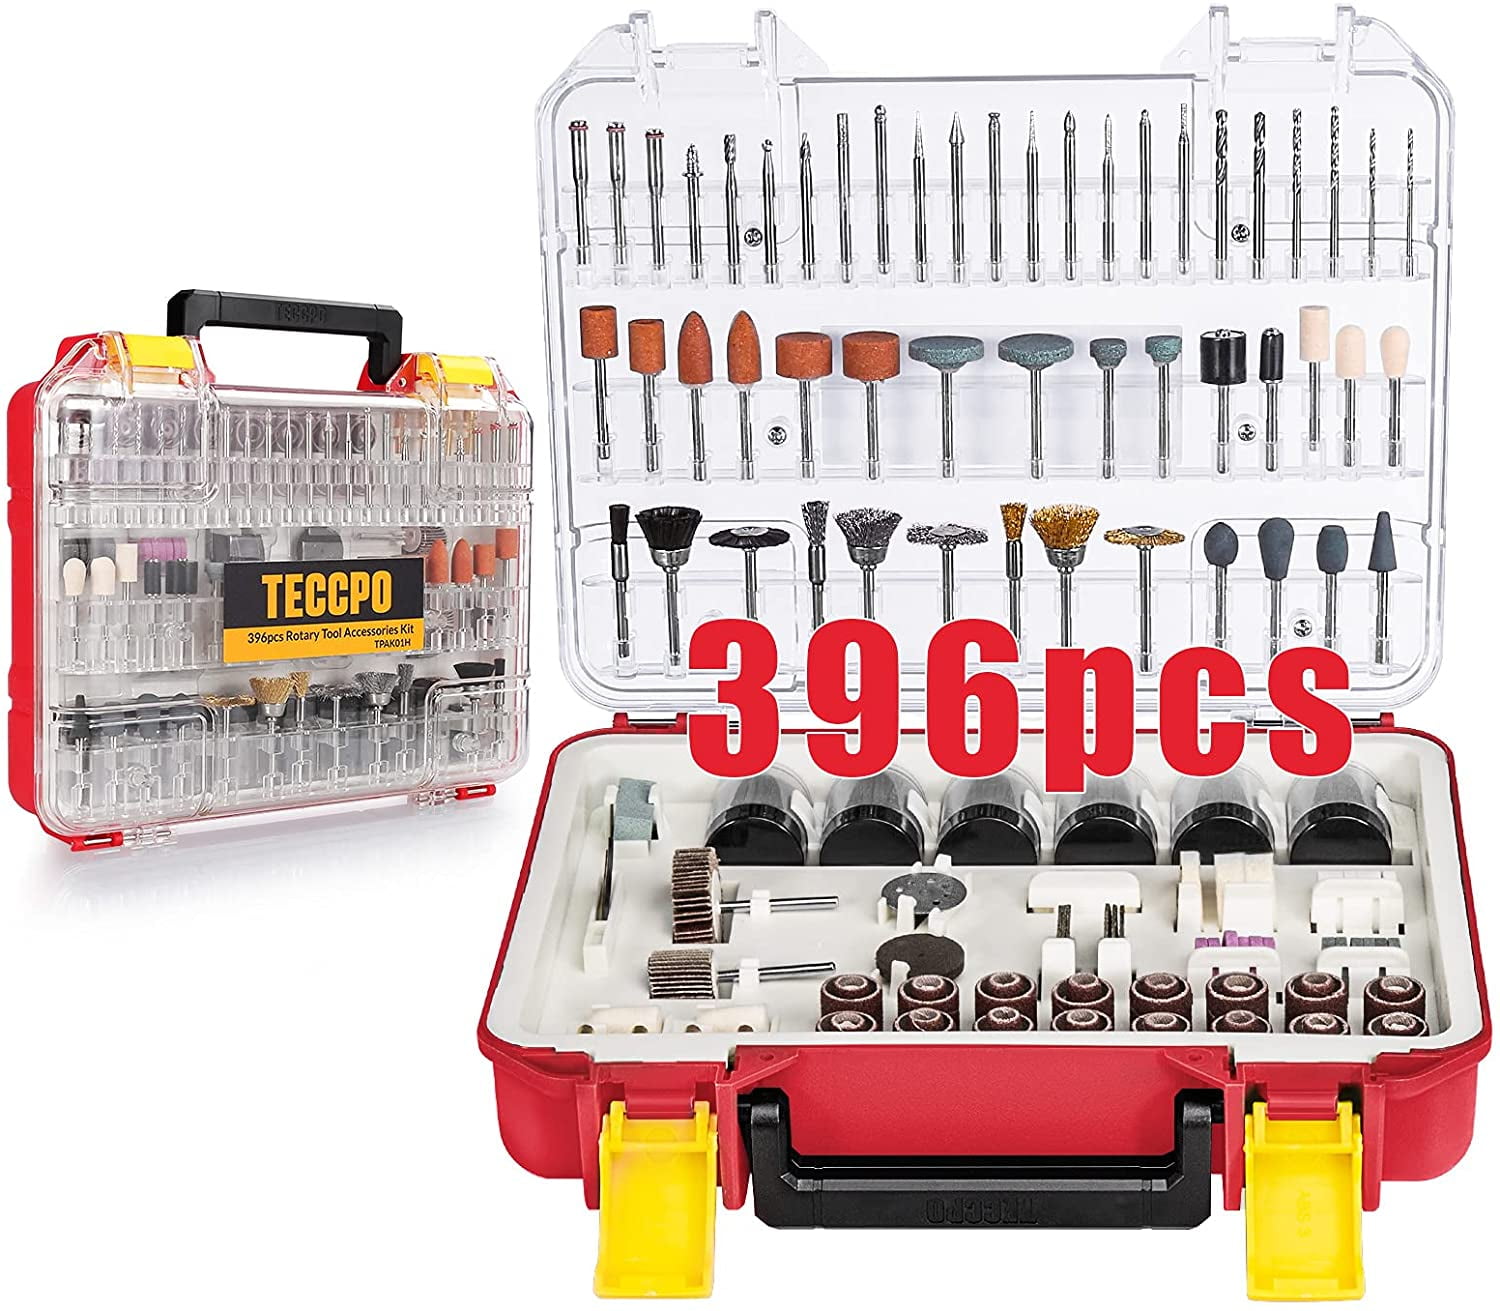 Rotary Tool Accessories Kit Engraving  Rotary Tool Cutting Accessories Kit  - 287pcs - Aliexpress